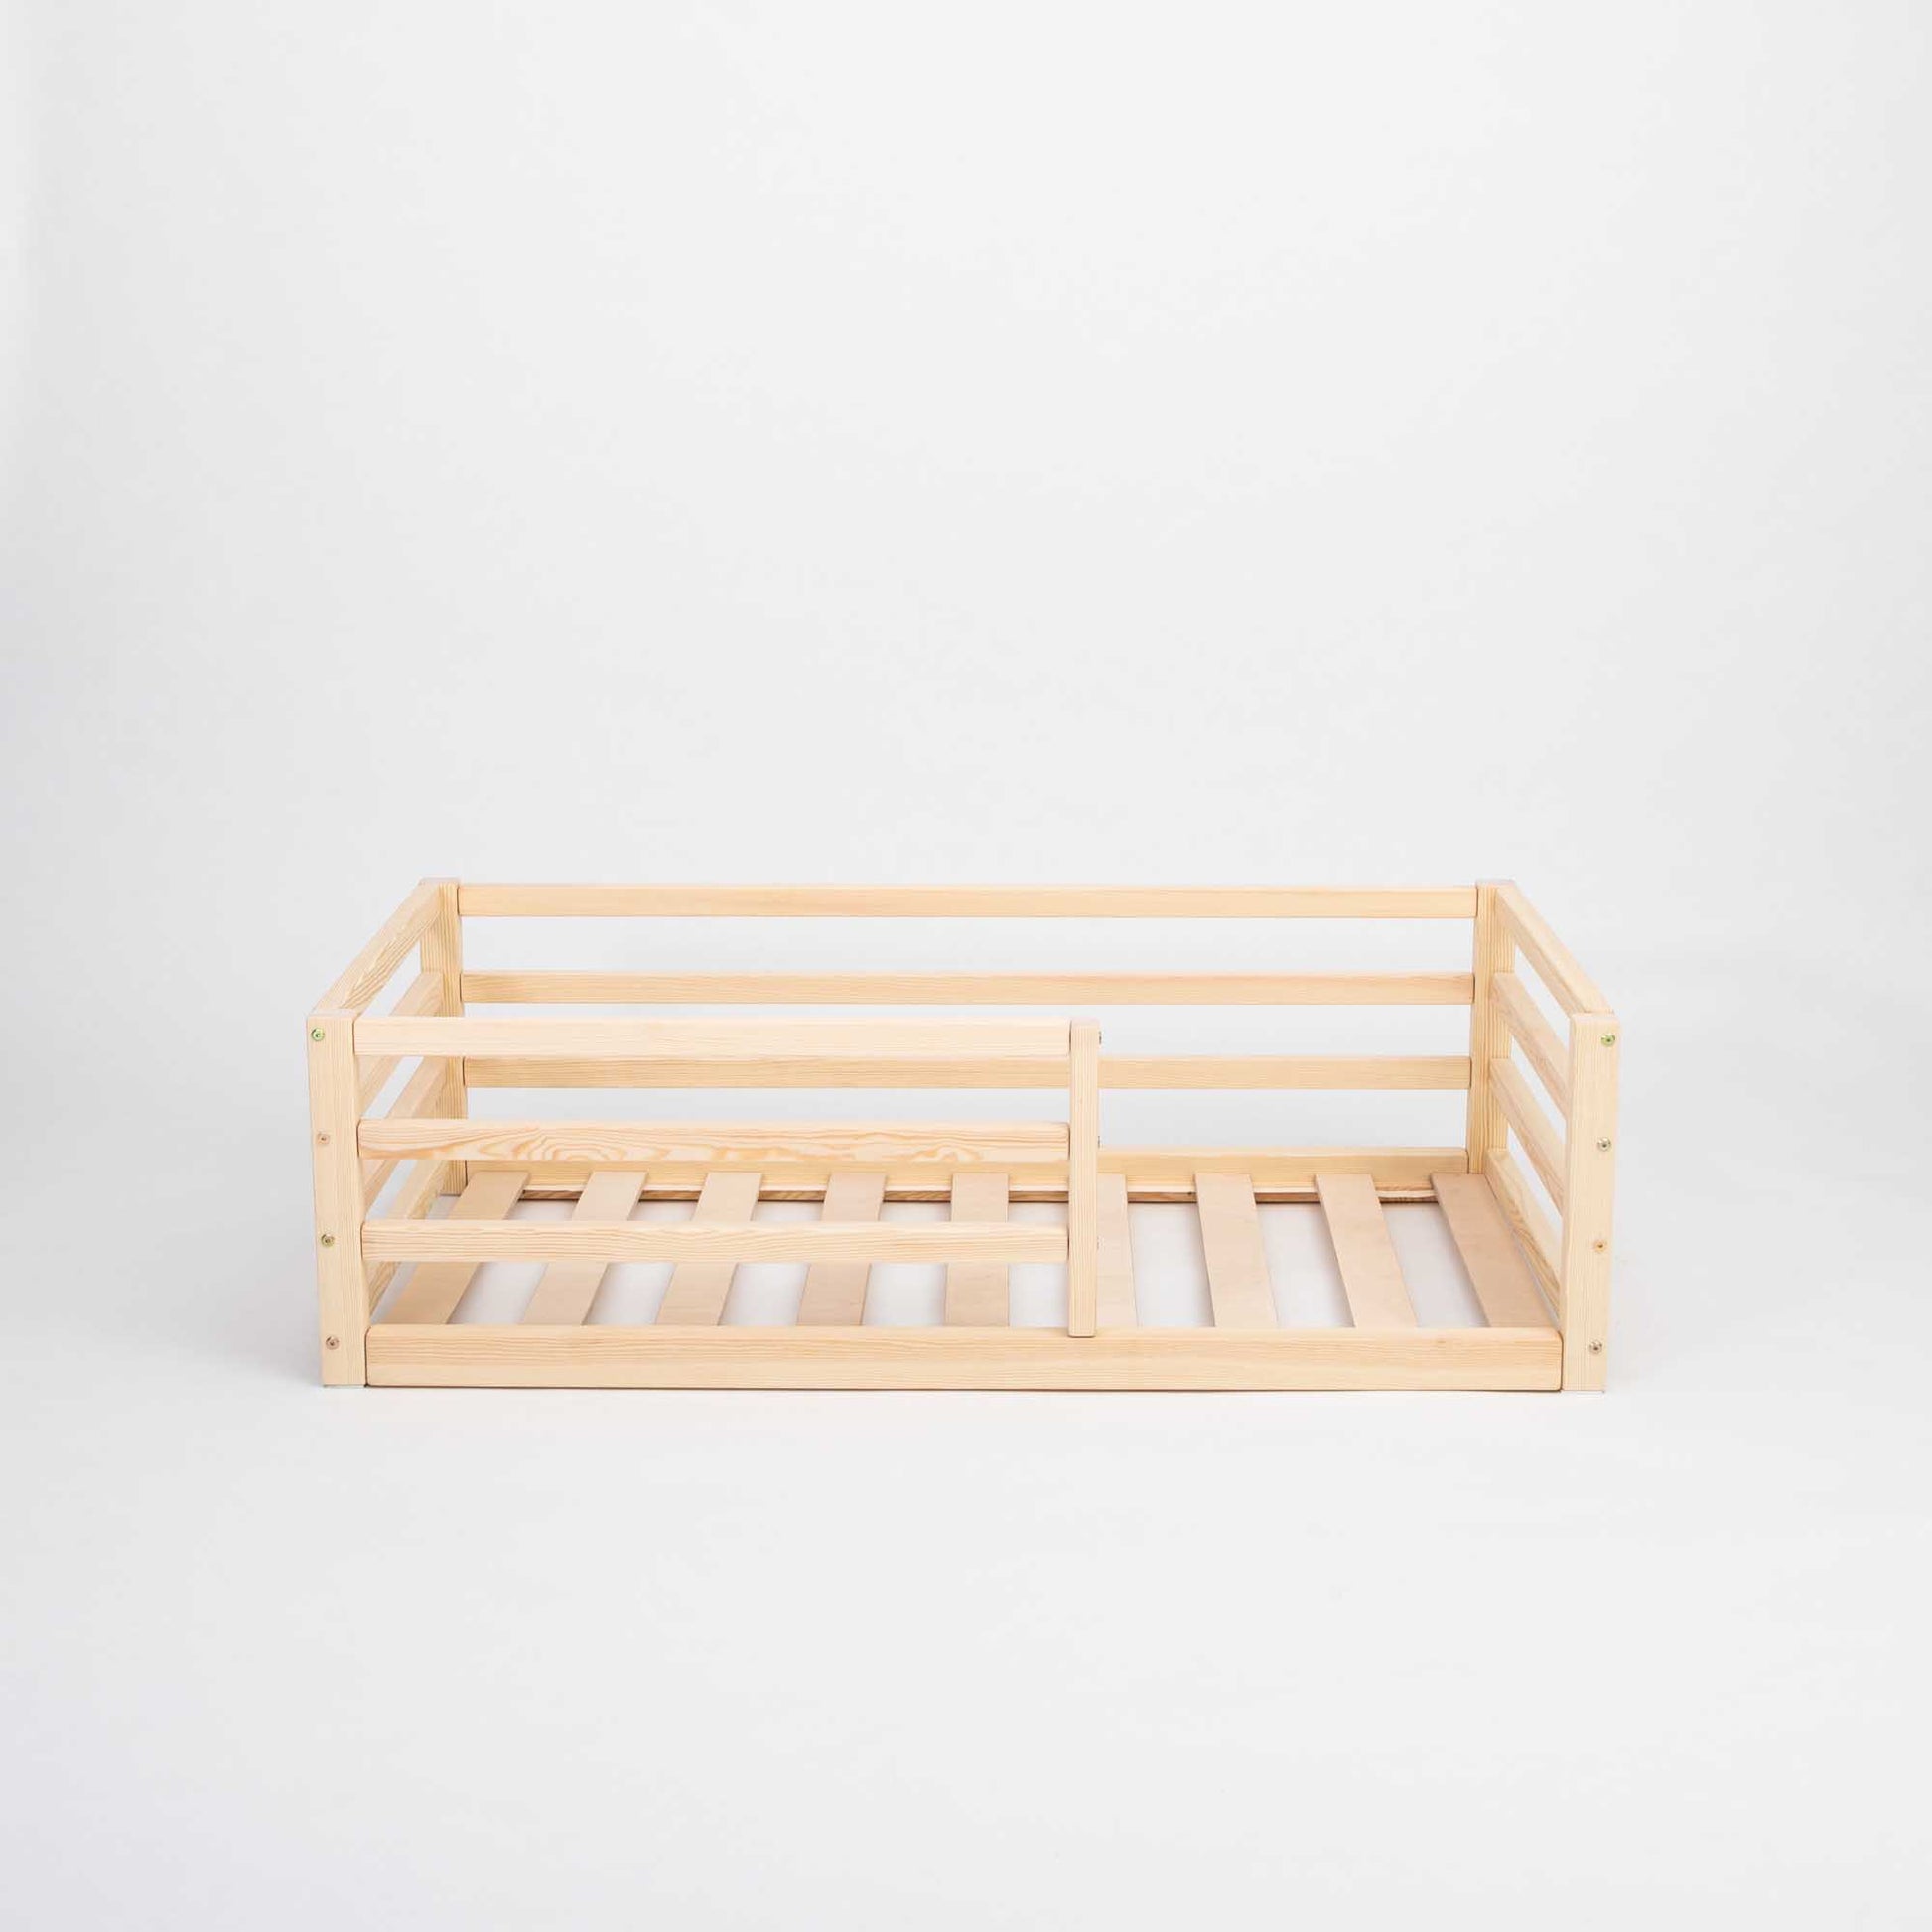 A Sweet Home From Wood floor-level kids' bed with a horizontal rail fence for independent sleeping, featuring a wooden divider.